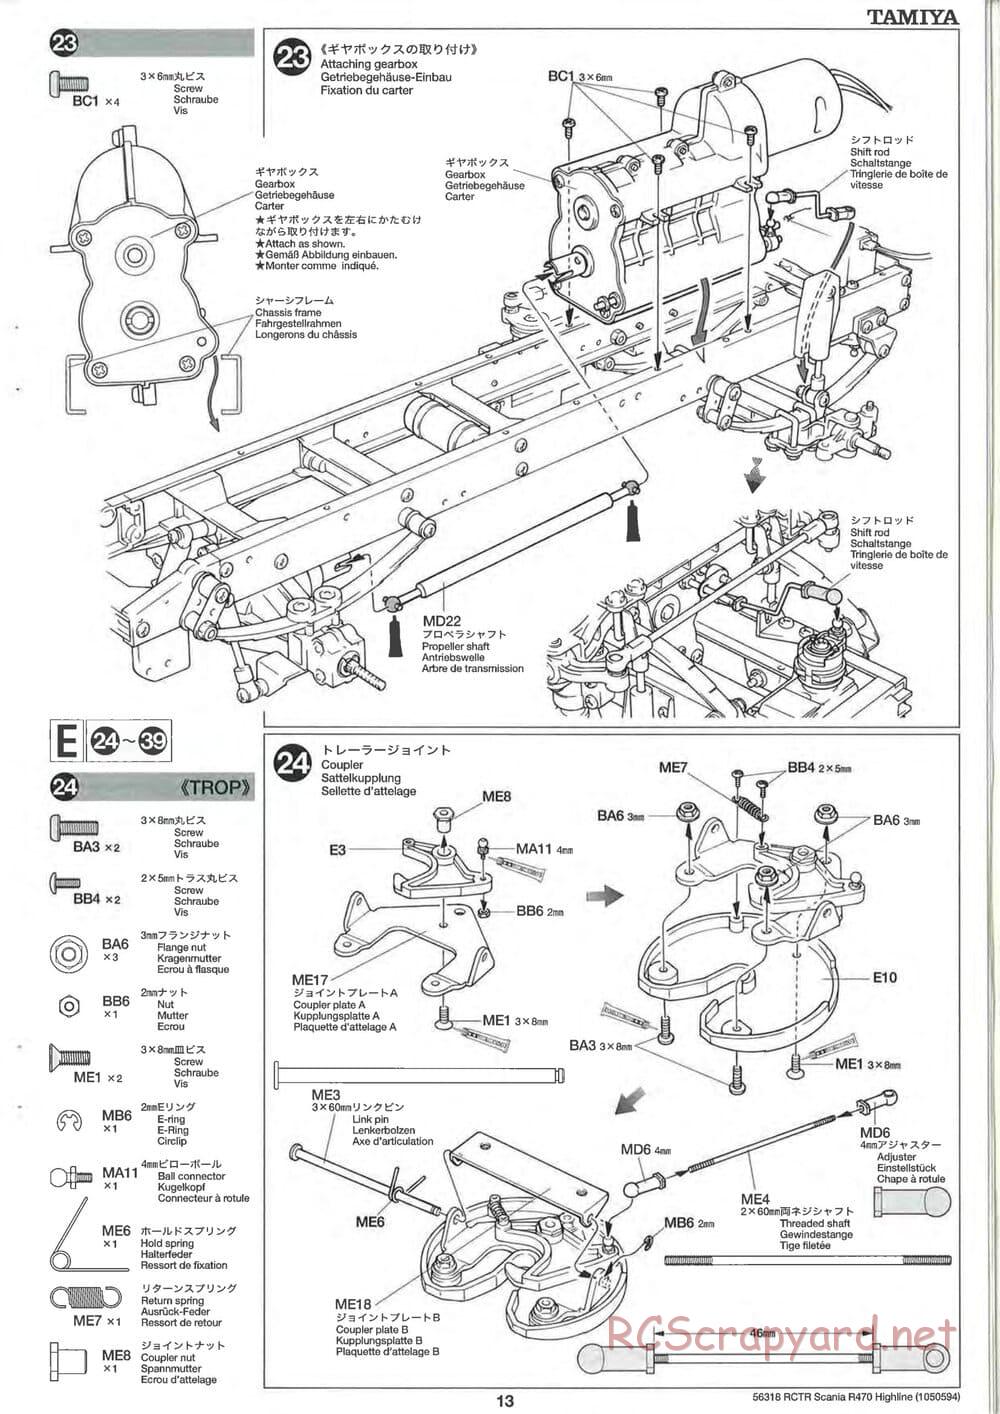 Tamiya - Scania R470 Highline Tractor Truck Chassis - Manual - Page 13